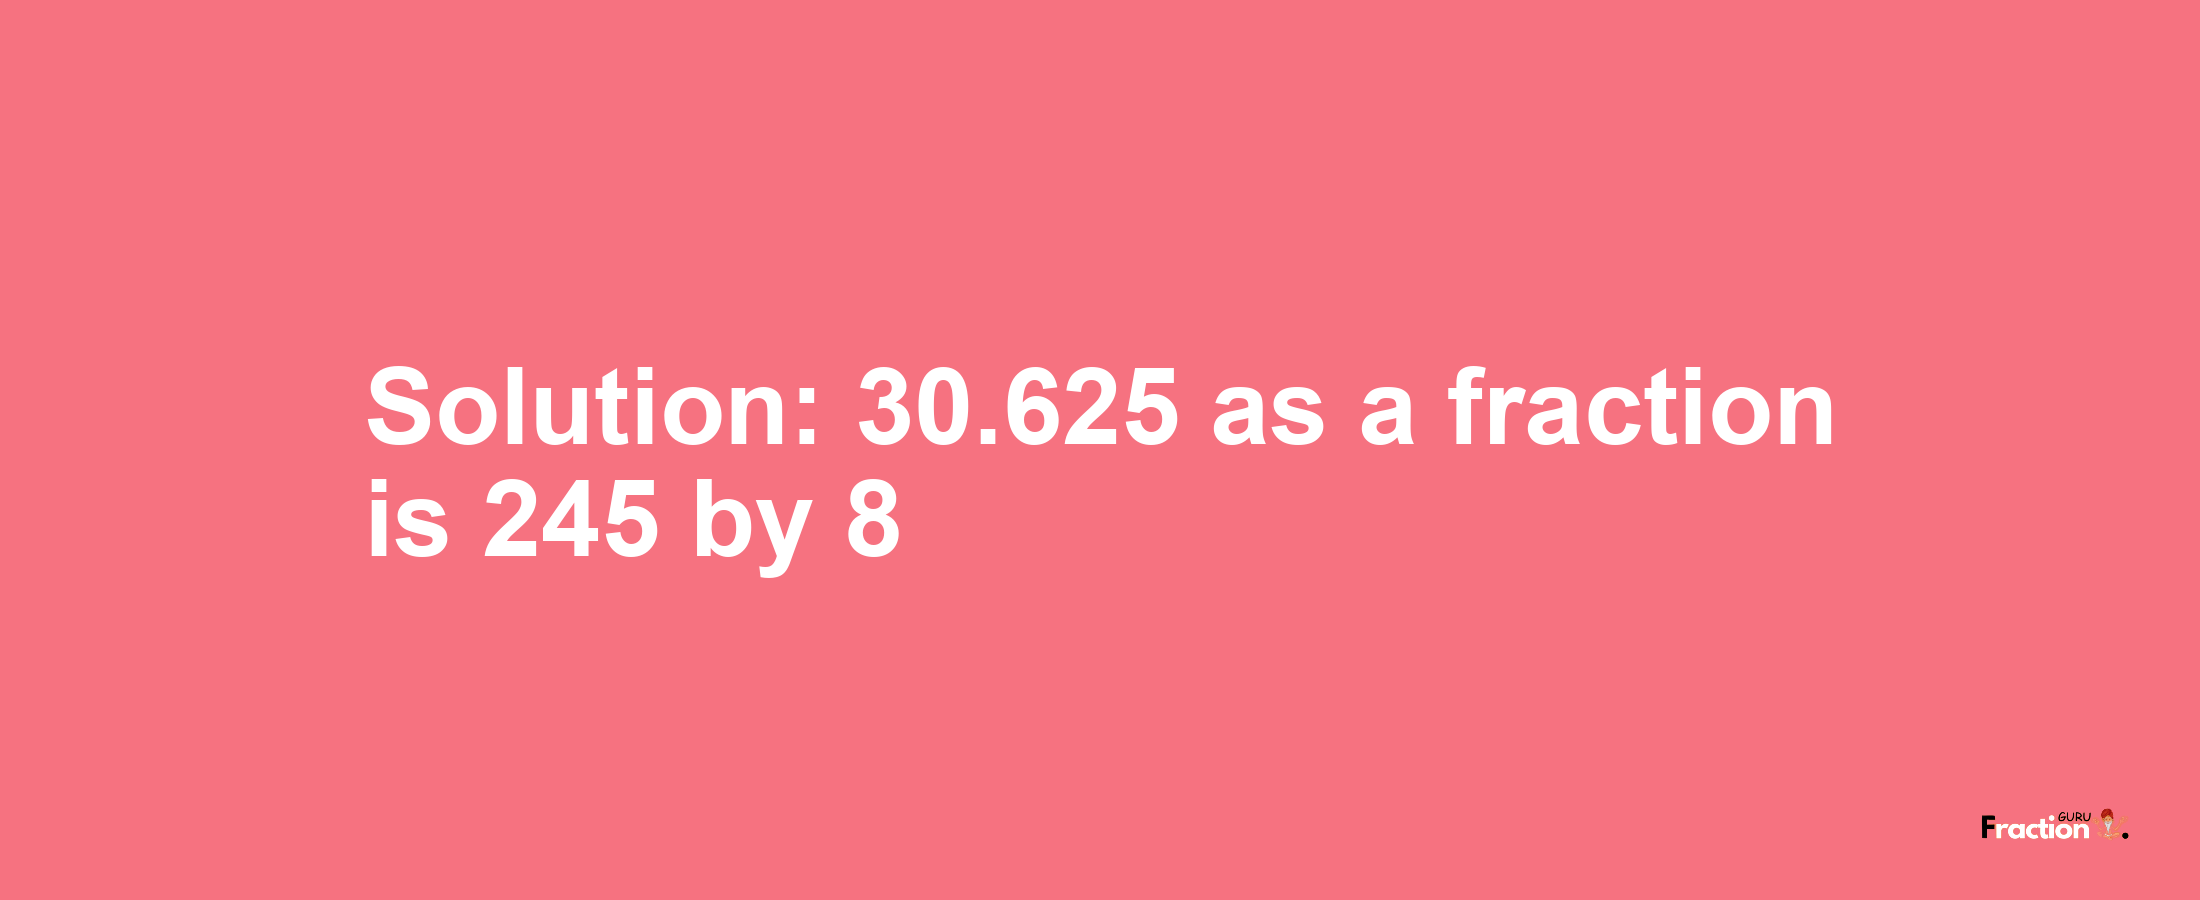 Solution:30.625 as a fraction is 245/8